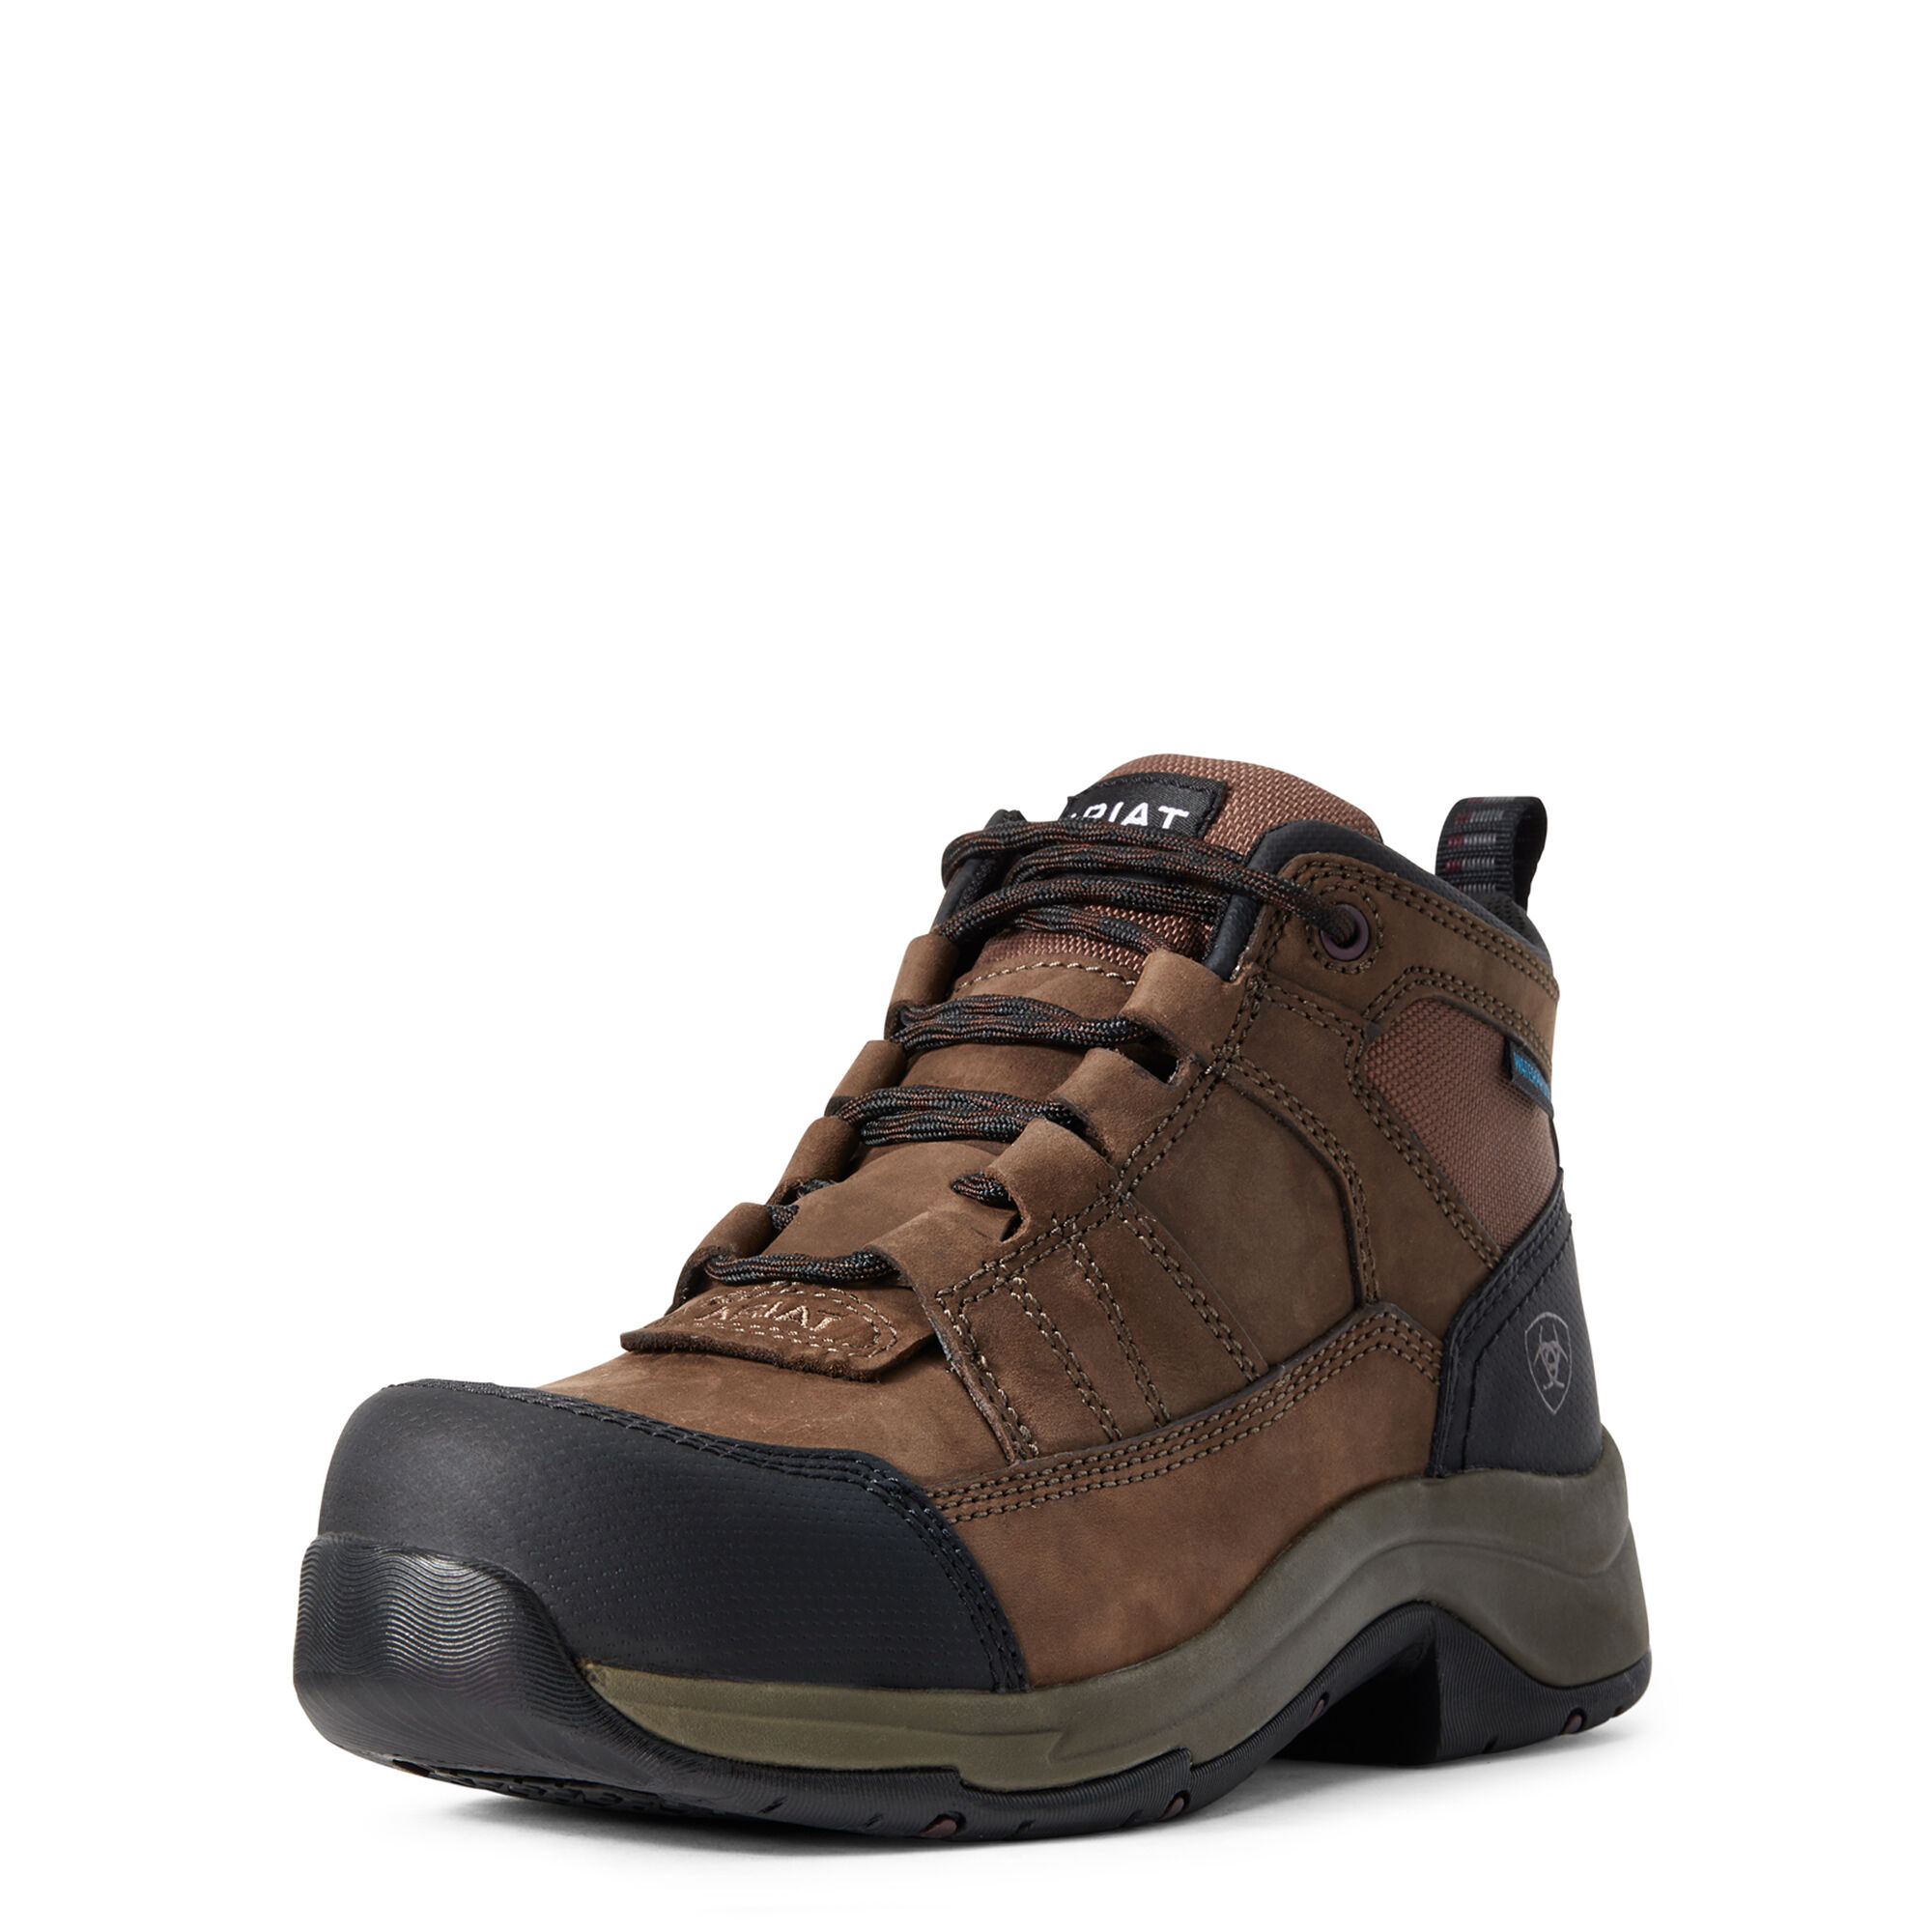 Women's Telluride Waterproof Composite Toe Work Boots in Distressed Brown Leather  by Ariat